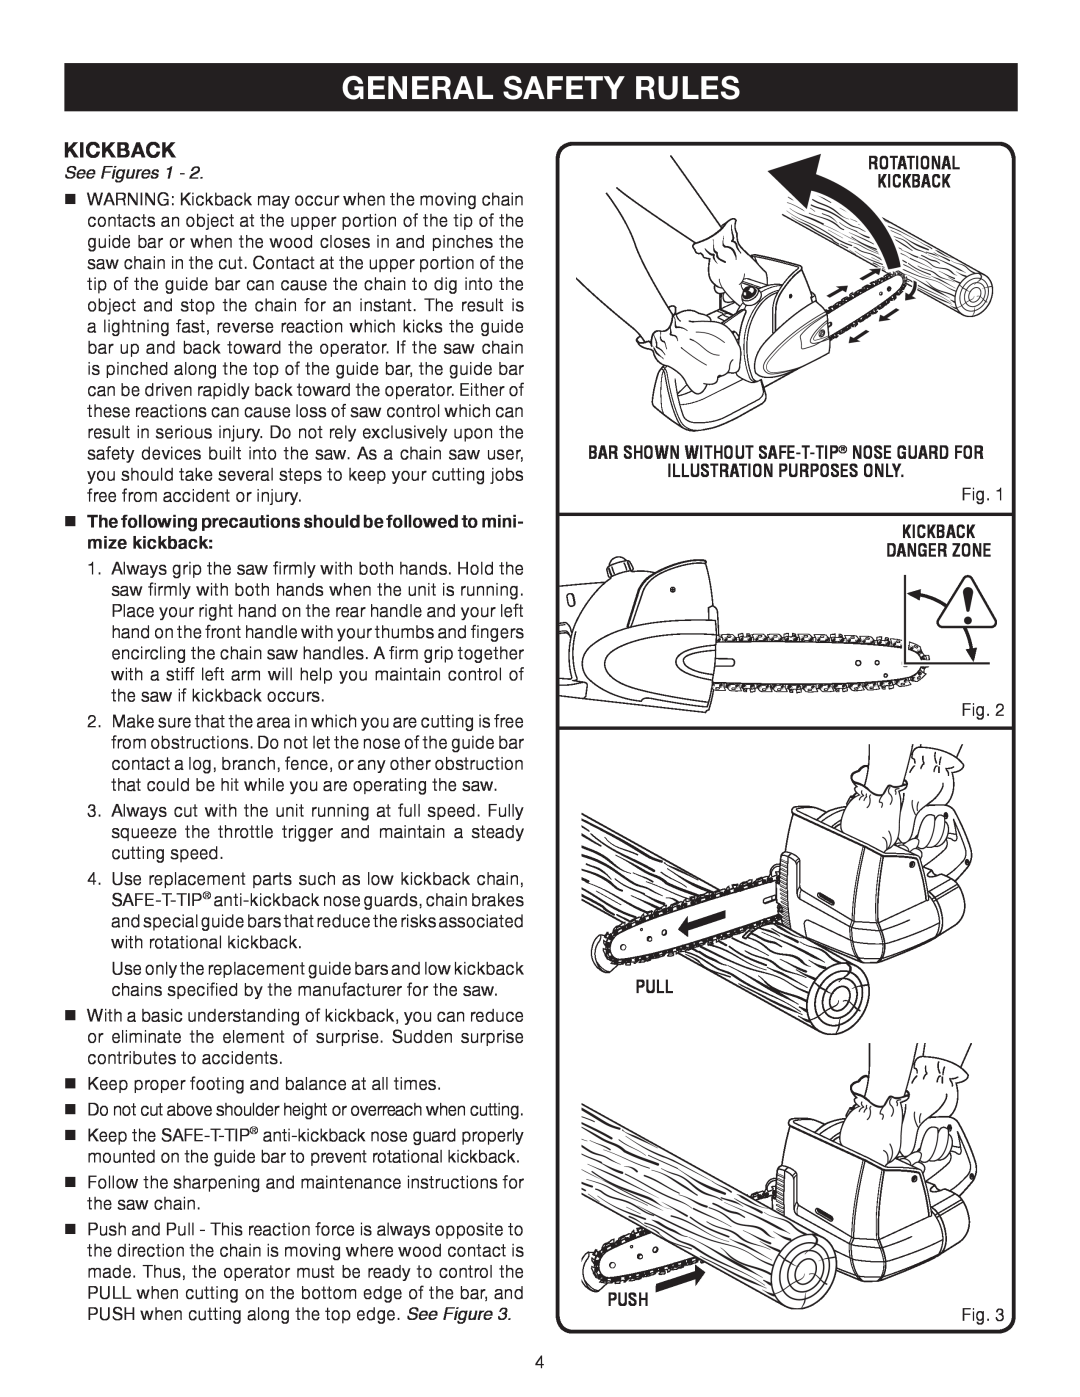 Ryobi Outdoor P540 General Safety Rules, See Figures 1, Illustration Purposes Only, Kickback Danger Zone, Pull Push 